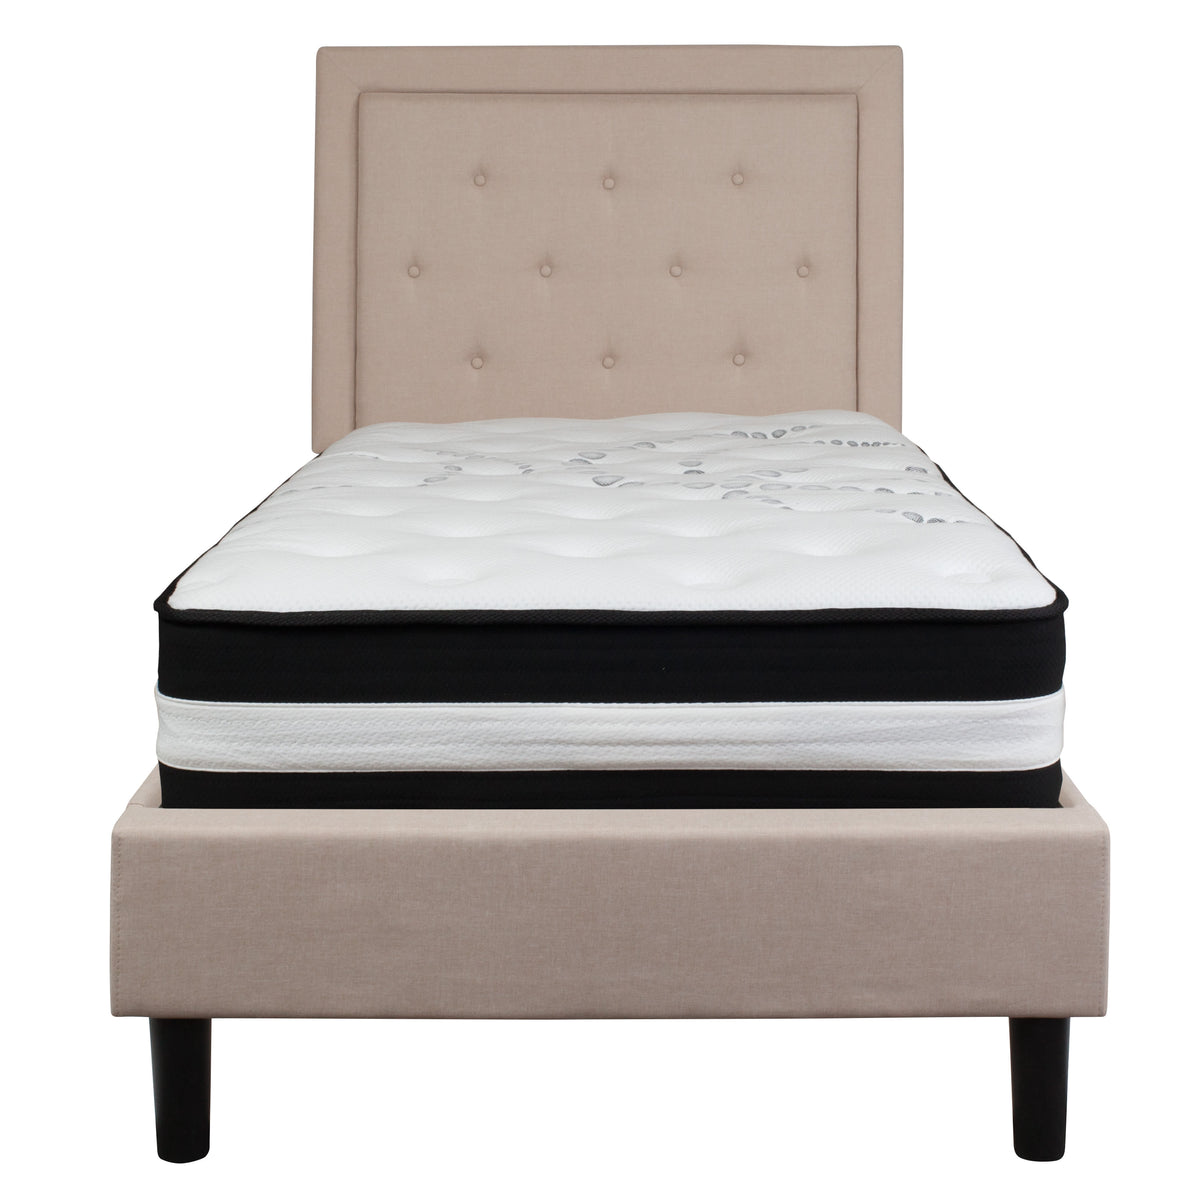 Beige,Twin |#| Twin Size Panel Tufted Beige Fabric Platform Bed with Pocket Spring Mattress